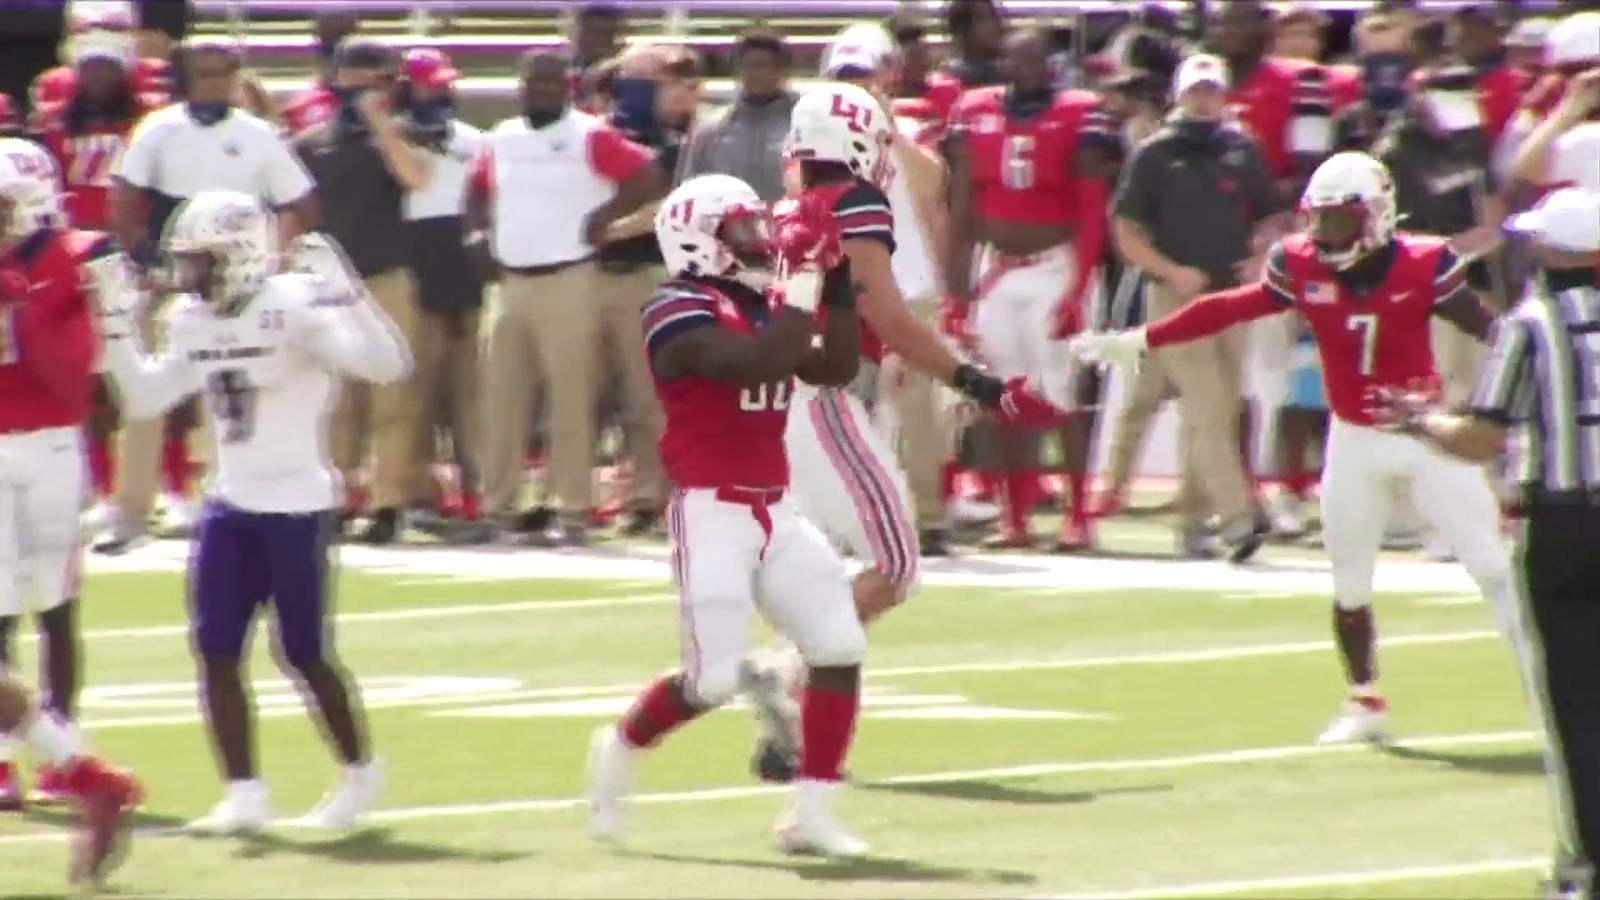 Liberty moves to 3-0 after a 28-7 win over North Alabama